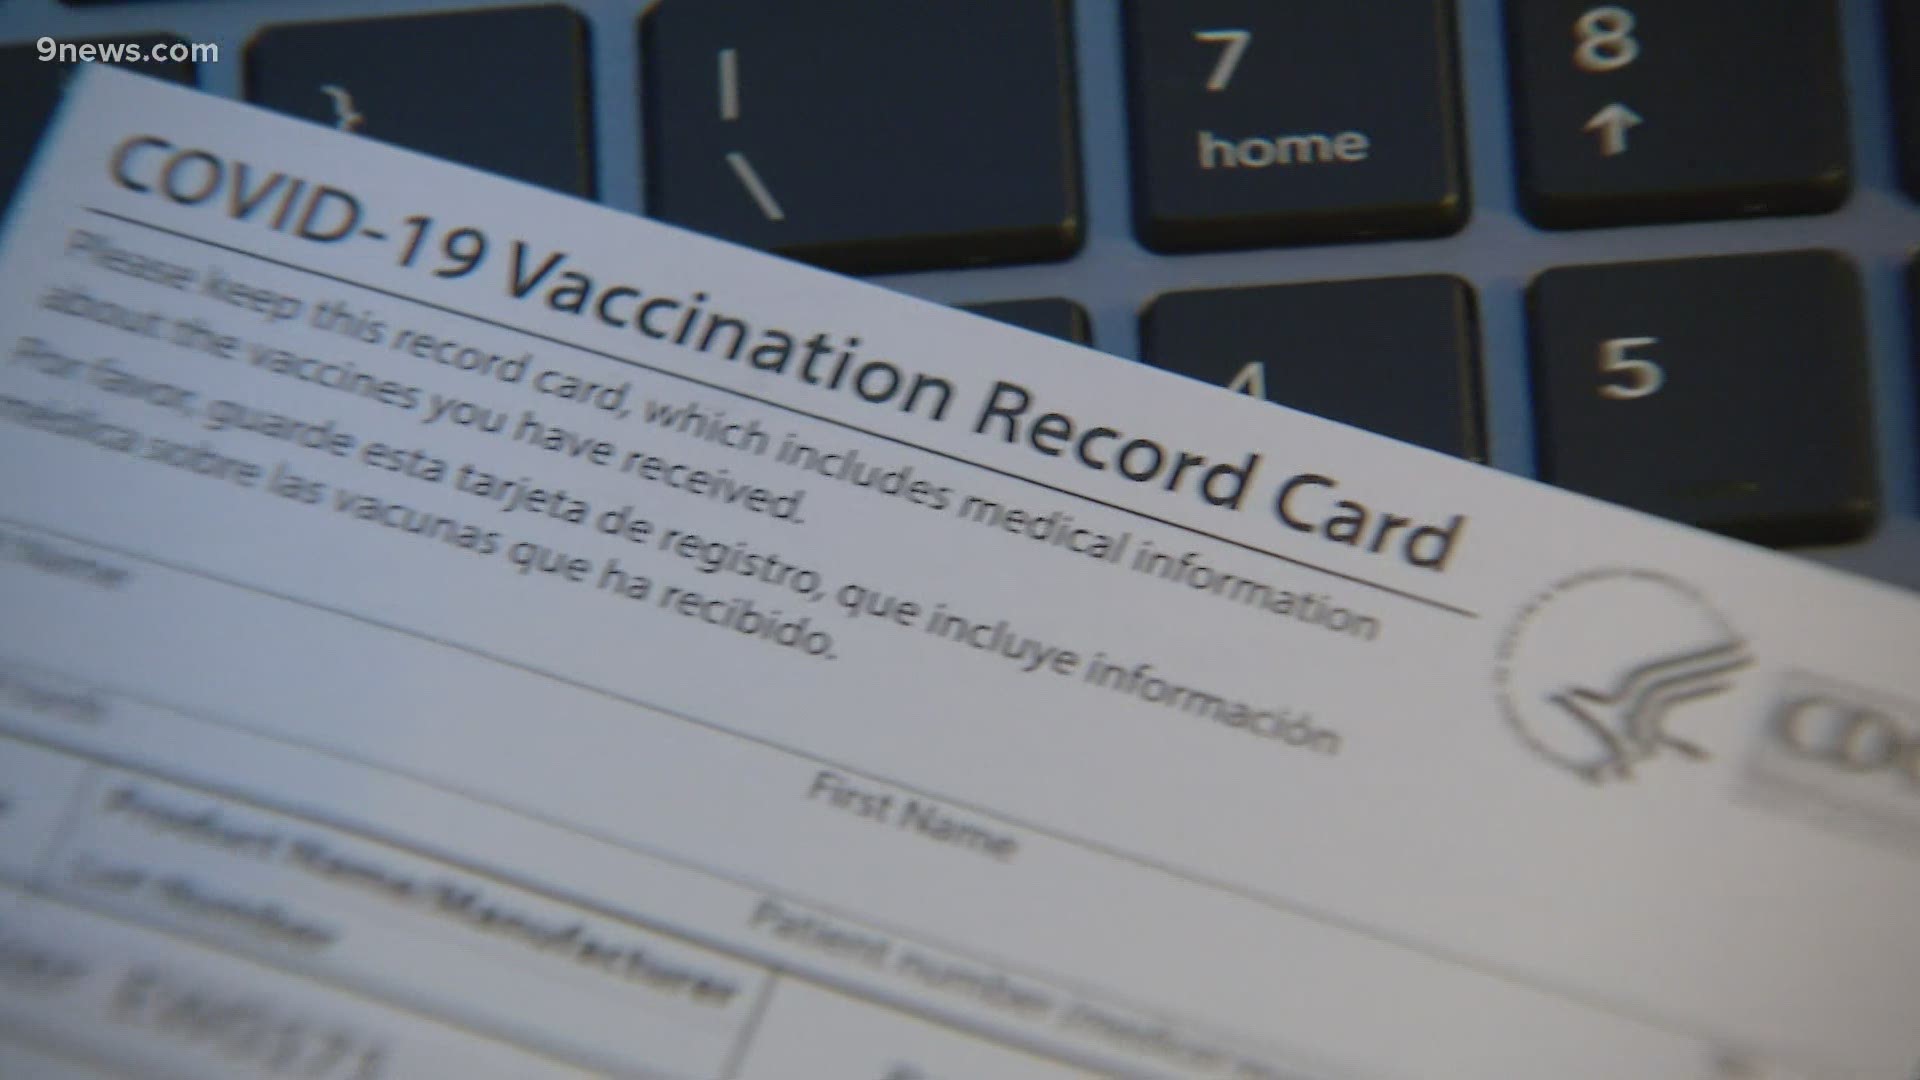 Criminals are stealing personal information when people post pictures with their COVID vaccination cards online.